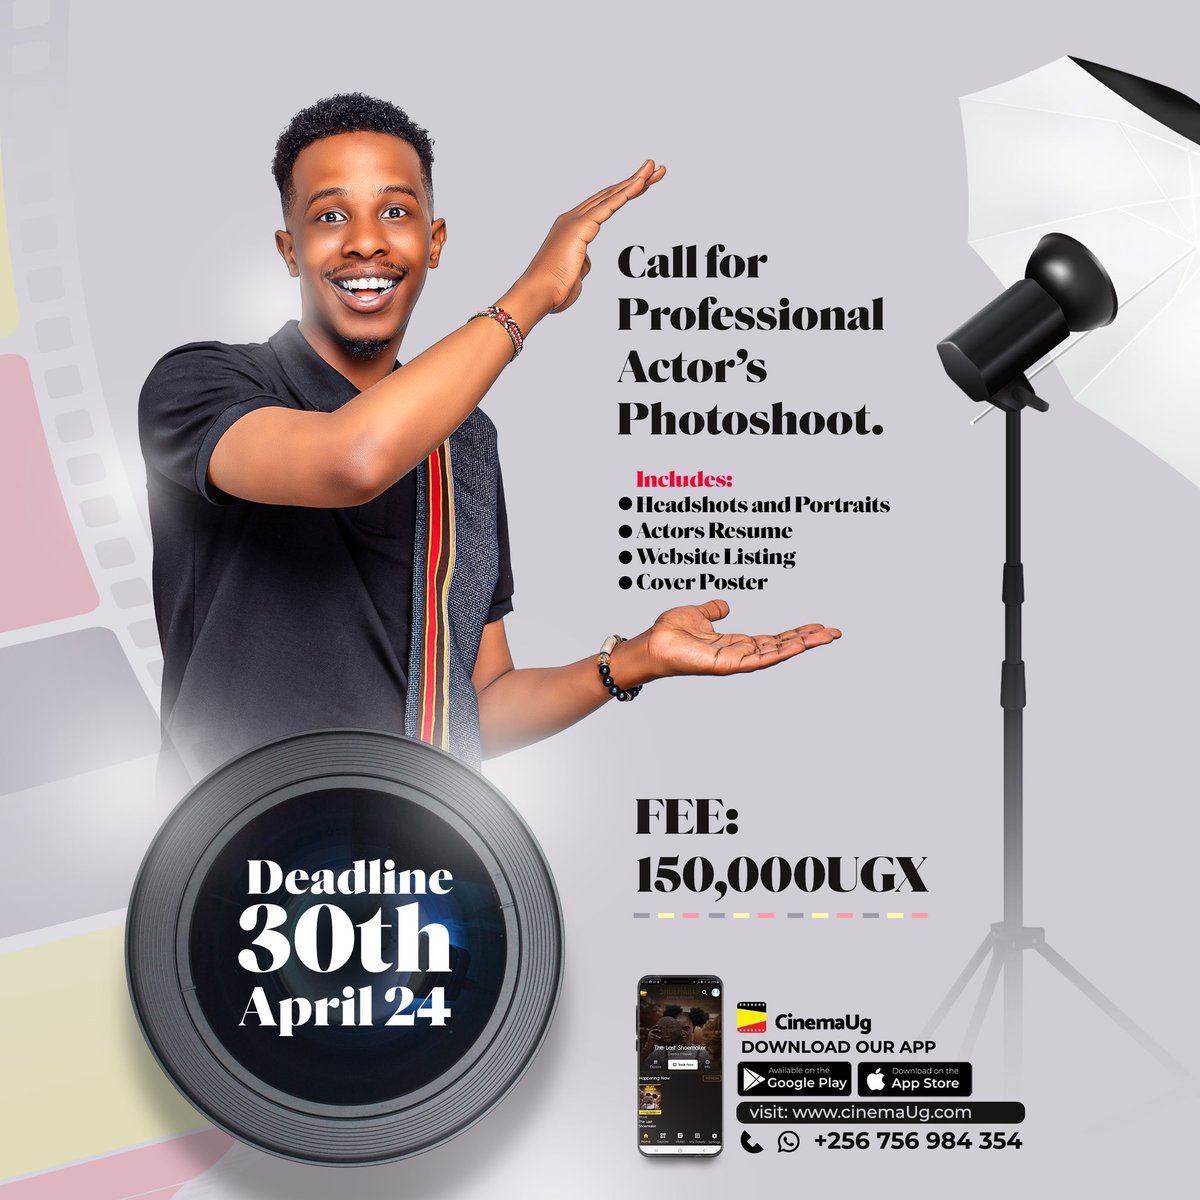 30th April is next week on Tuesday, have you registered for the professional actor's photoshoot?

Our package provides you with the material to present yourself as a professional actor.

Details on poster, contact us😊
#CinemaUg